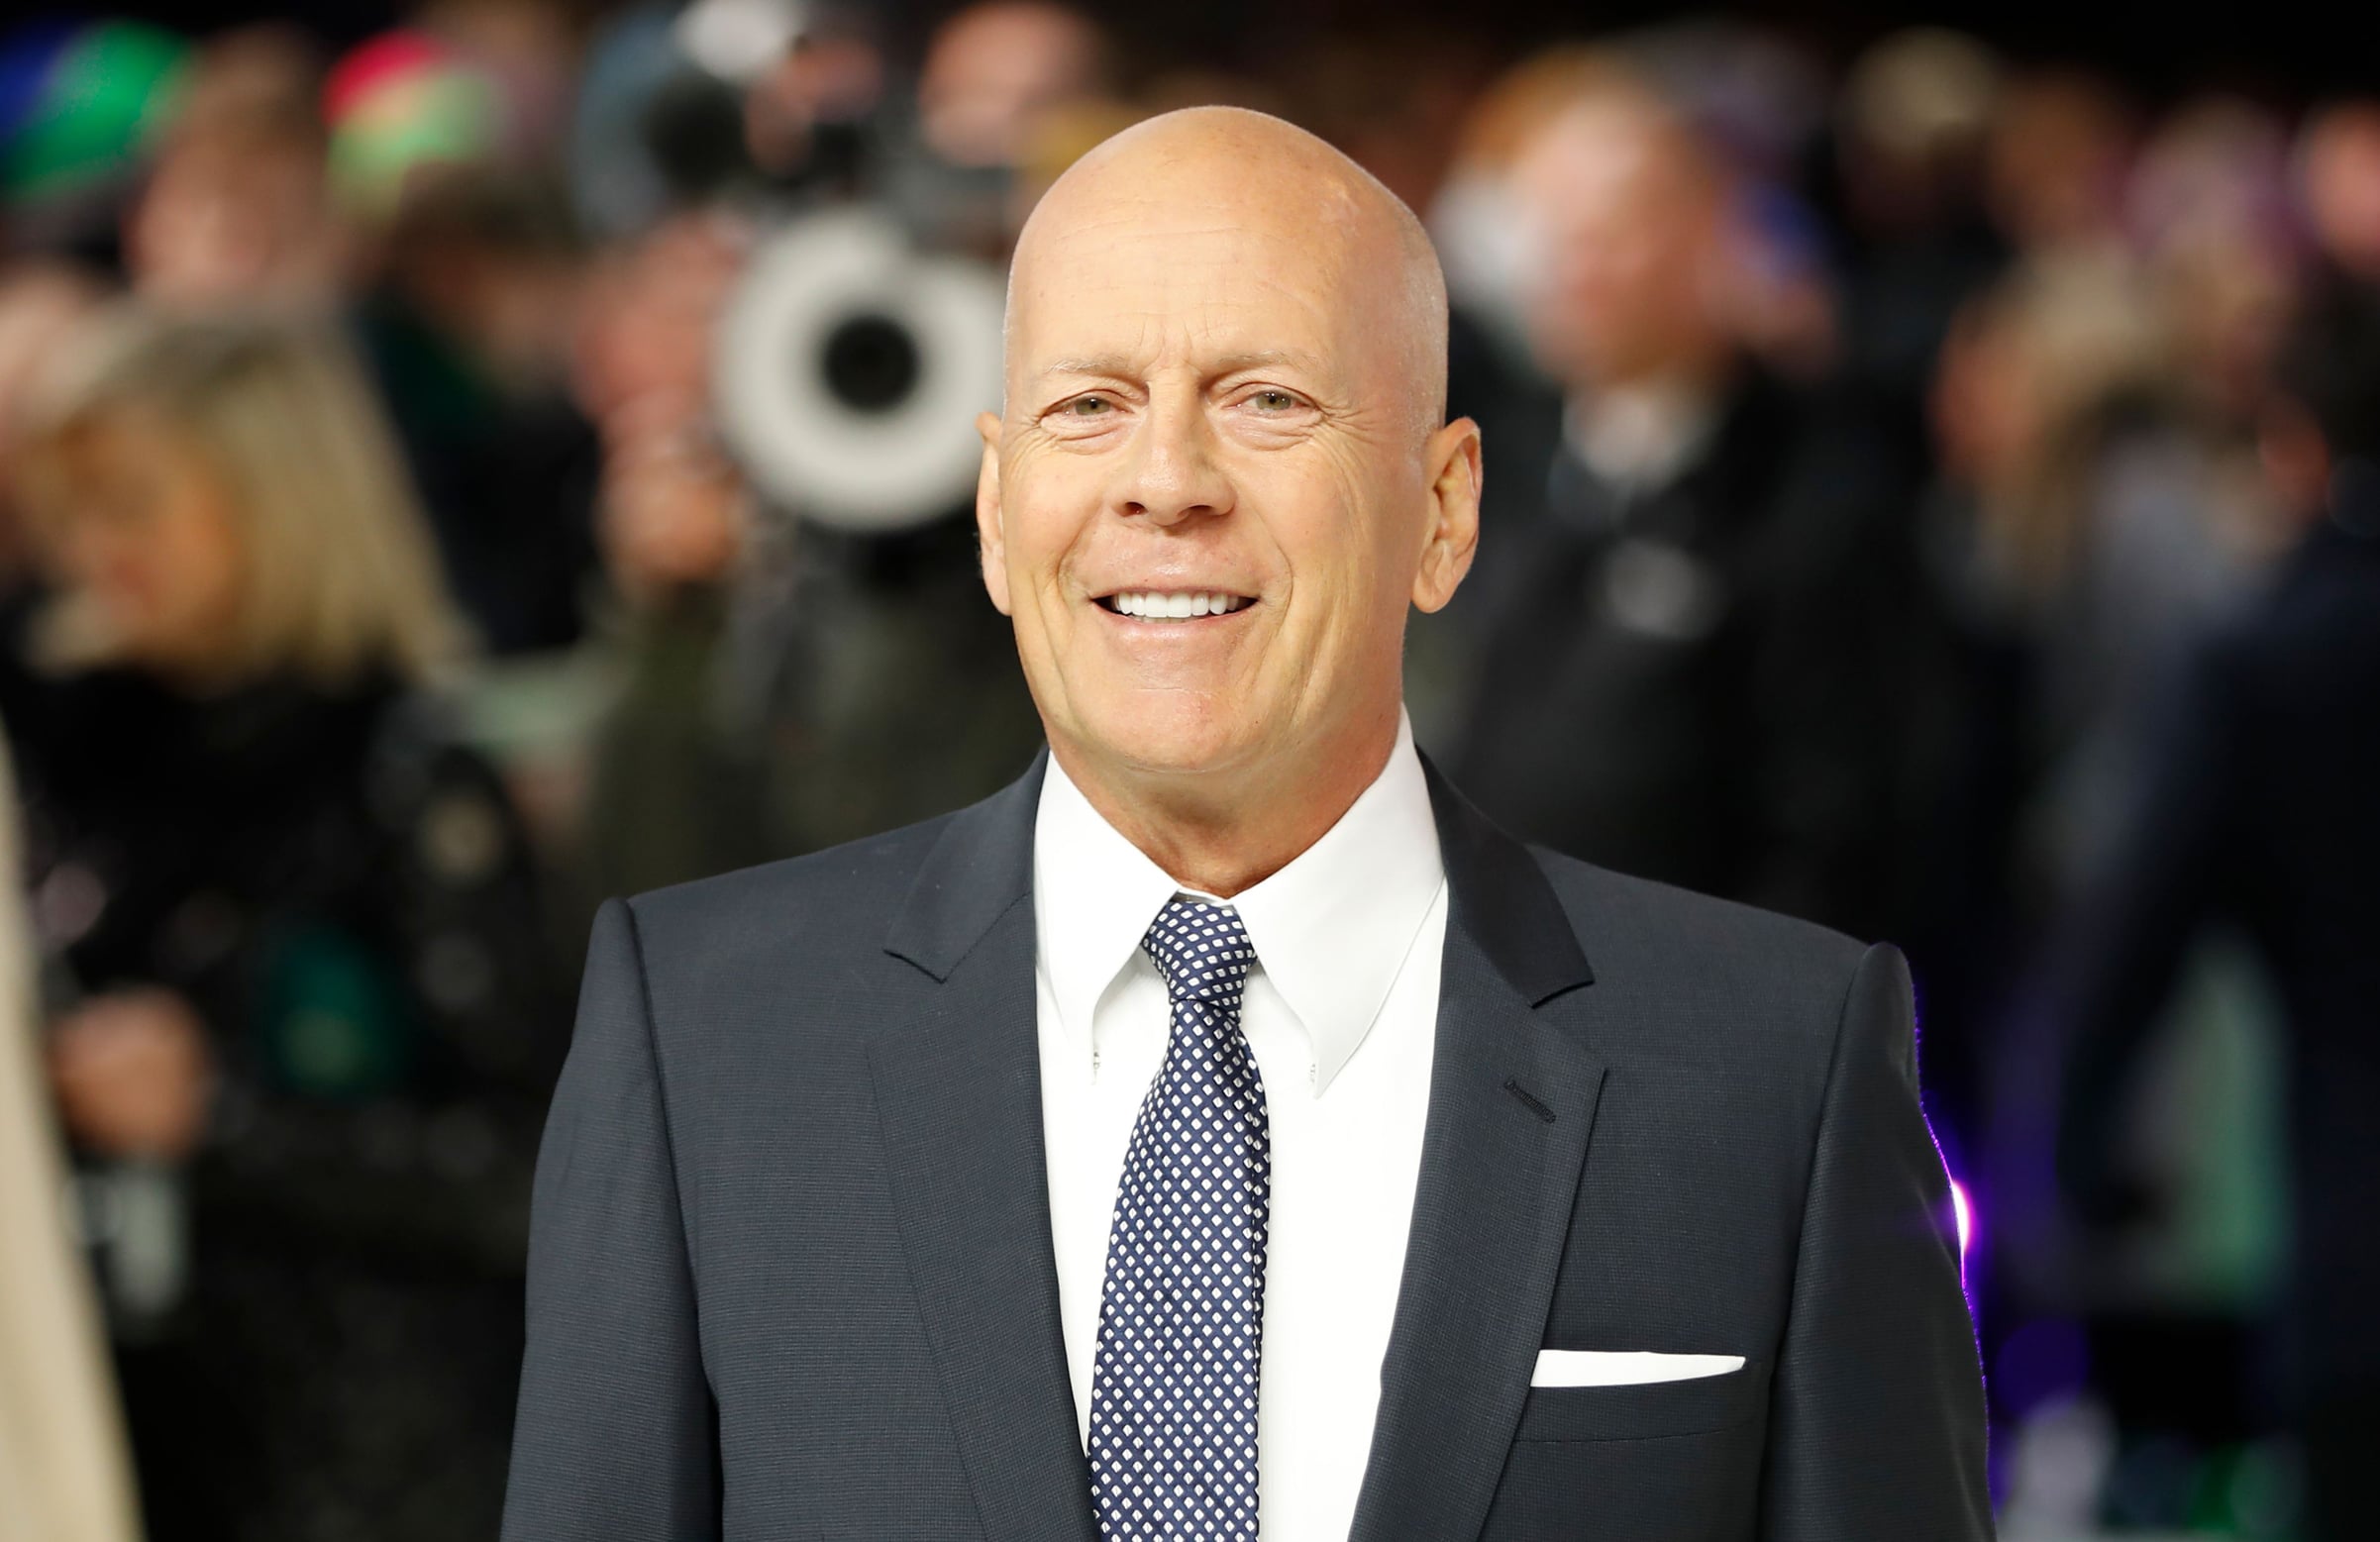 Die Hard' star Bruce Willis to give up acting after aphasia diagnosis –  ThePrint – ANIFeed